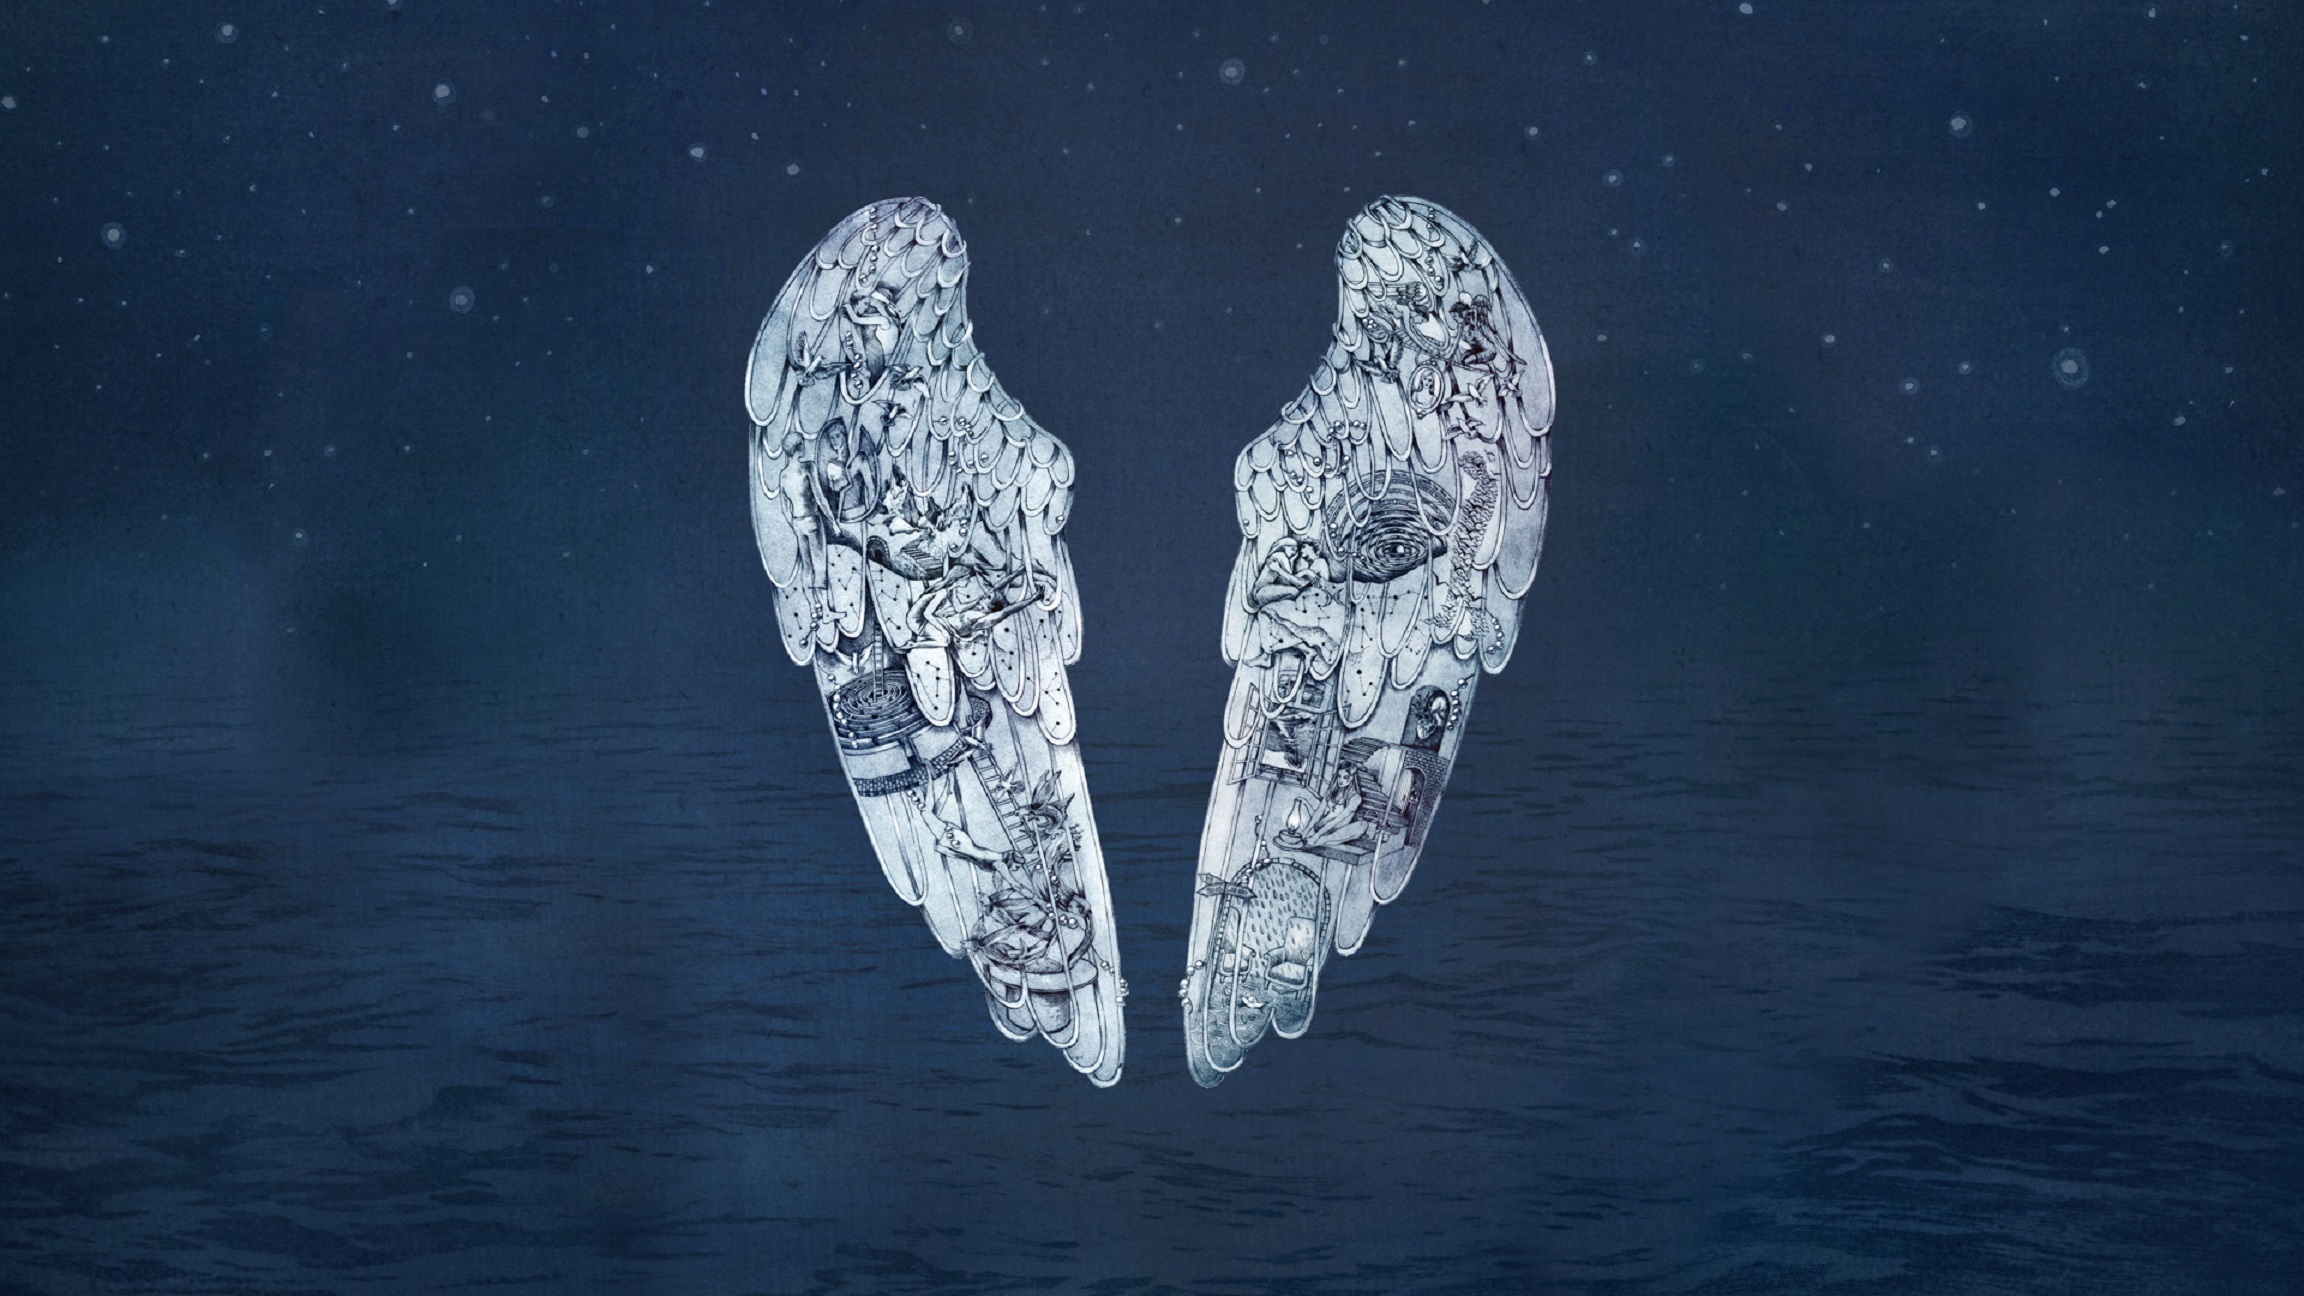 29 Coldplay HD Wallpapers | Backgrounds - Wallpaper Abyss